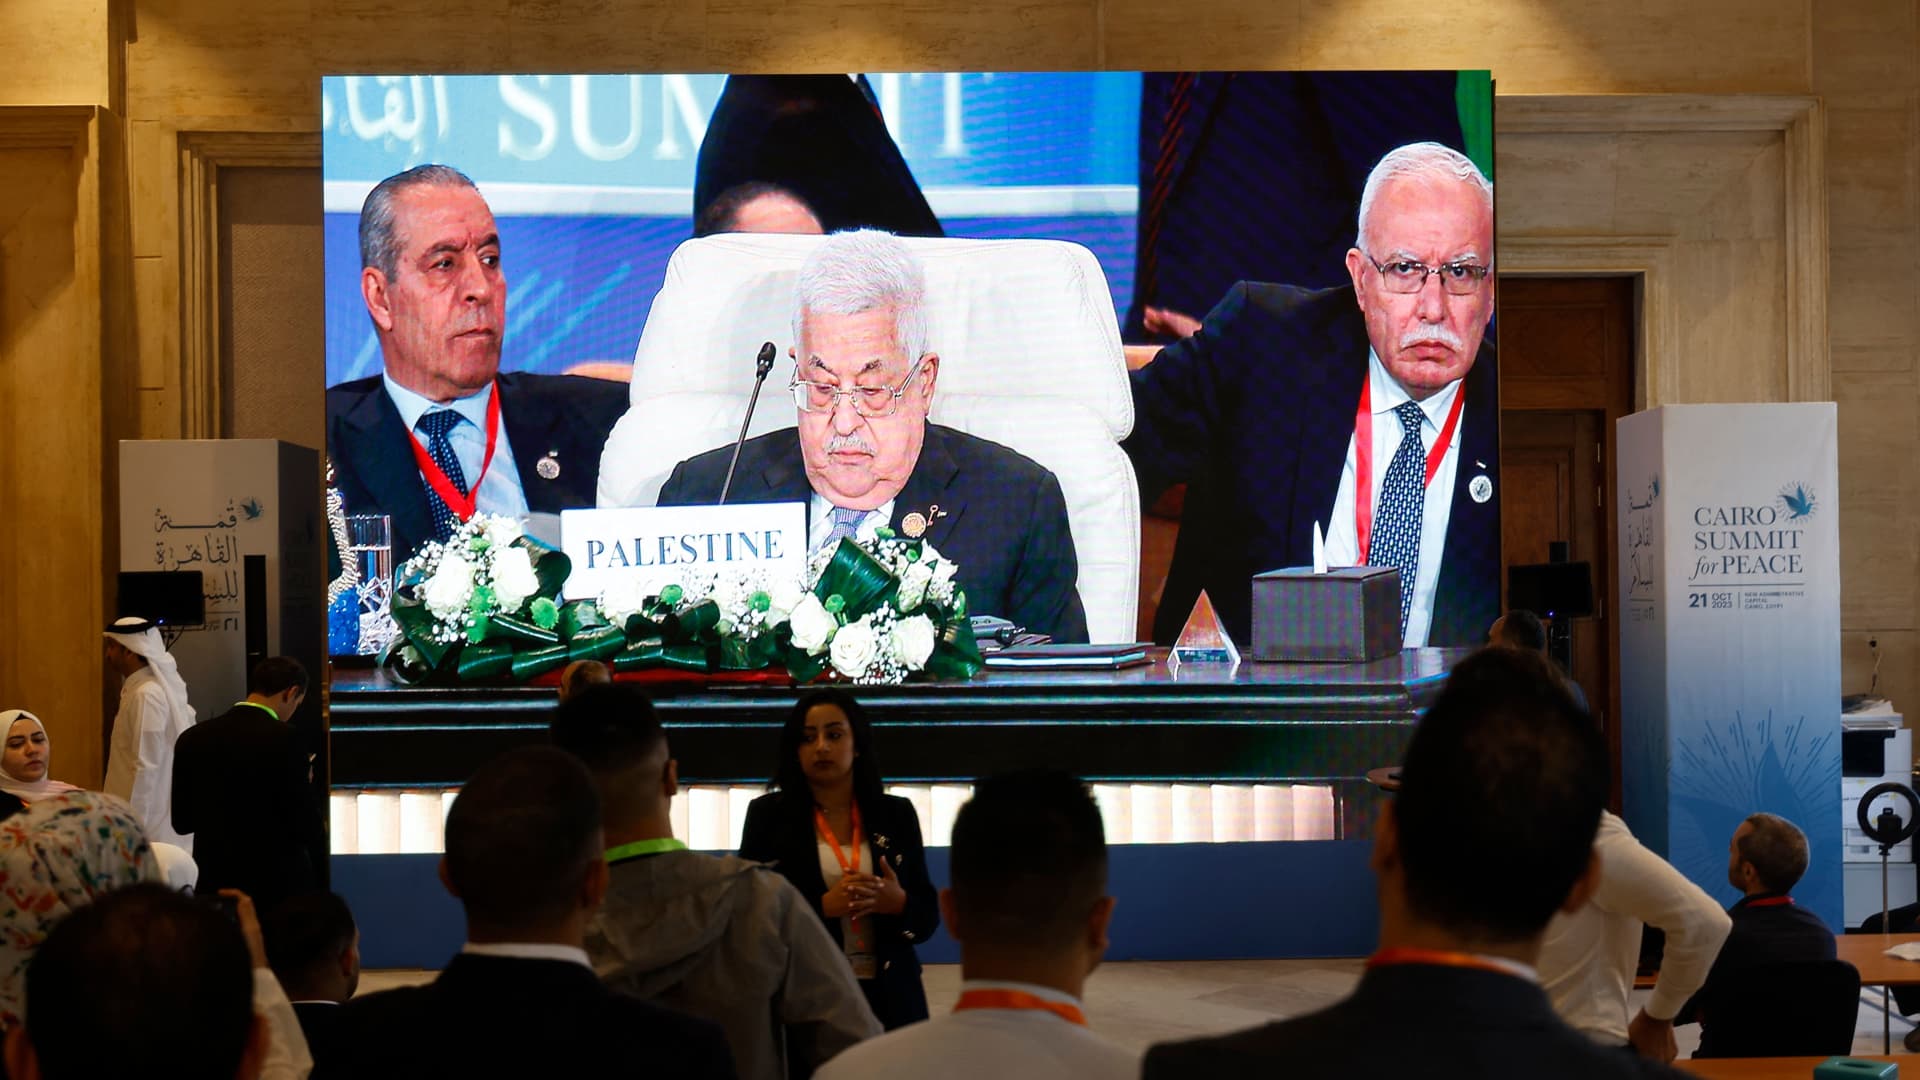 Seen on a large screen, Palestinian President Mahmoud Abbas attends the International Peace Summit hosted by the Egyptian president in Cairo on Oct. 21, 2023.